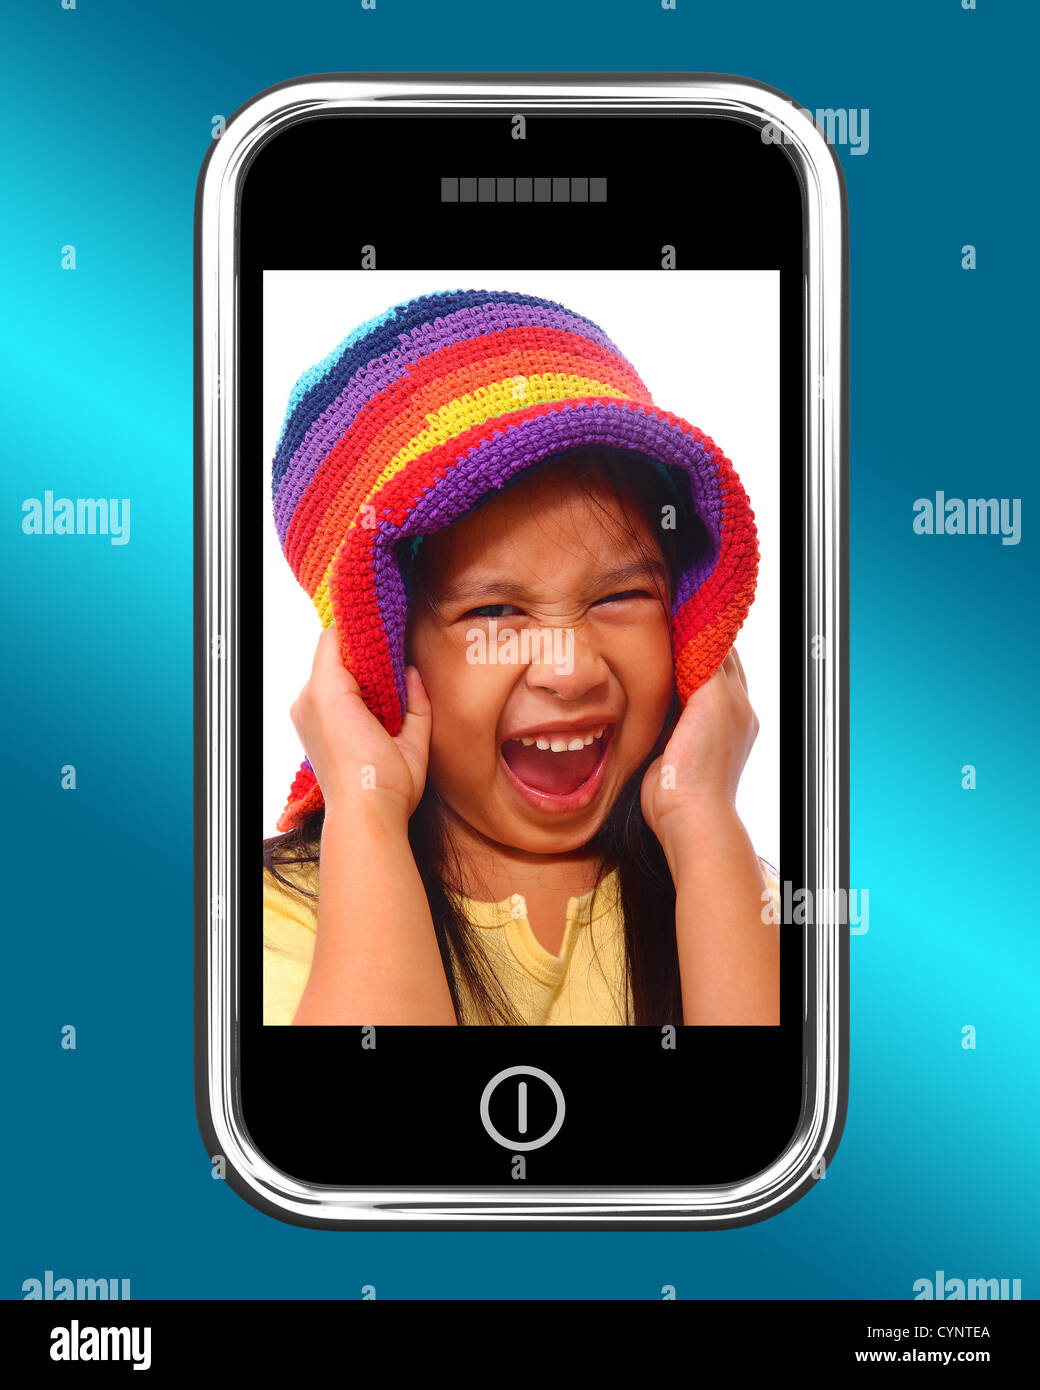 Happy Laughing Young Girl Photo sur smartphone Banque D'Images